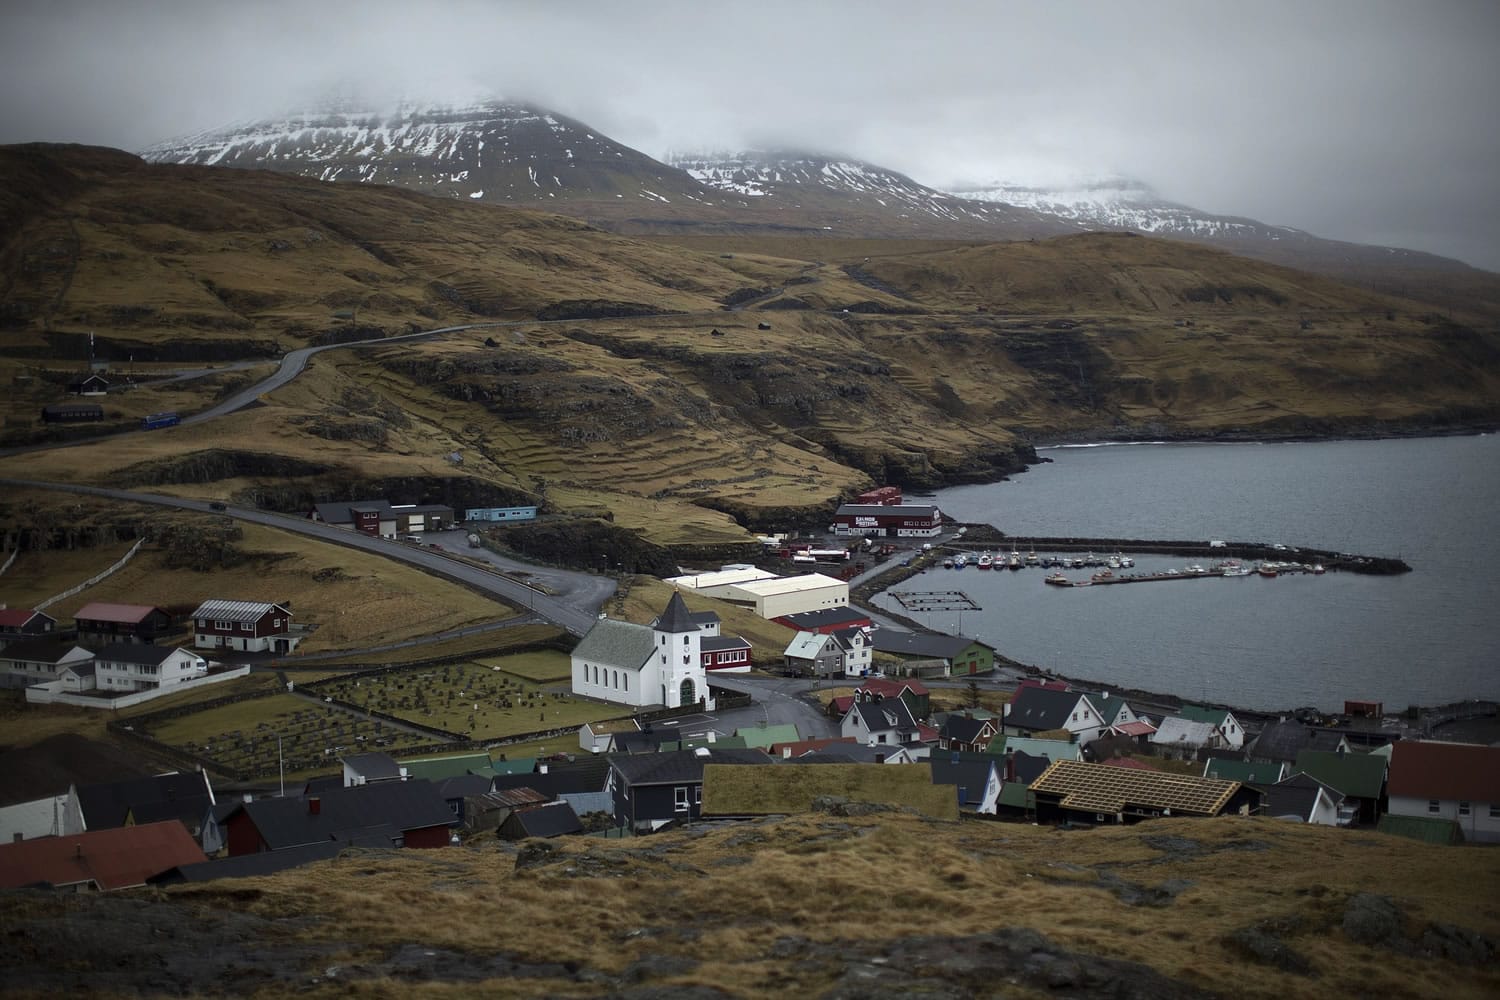 Cloudy skies hang over the hills overlooking the town of Eidi in the north of the Faeroe Islands on Thursday.